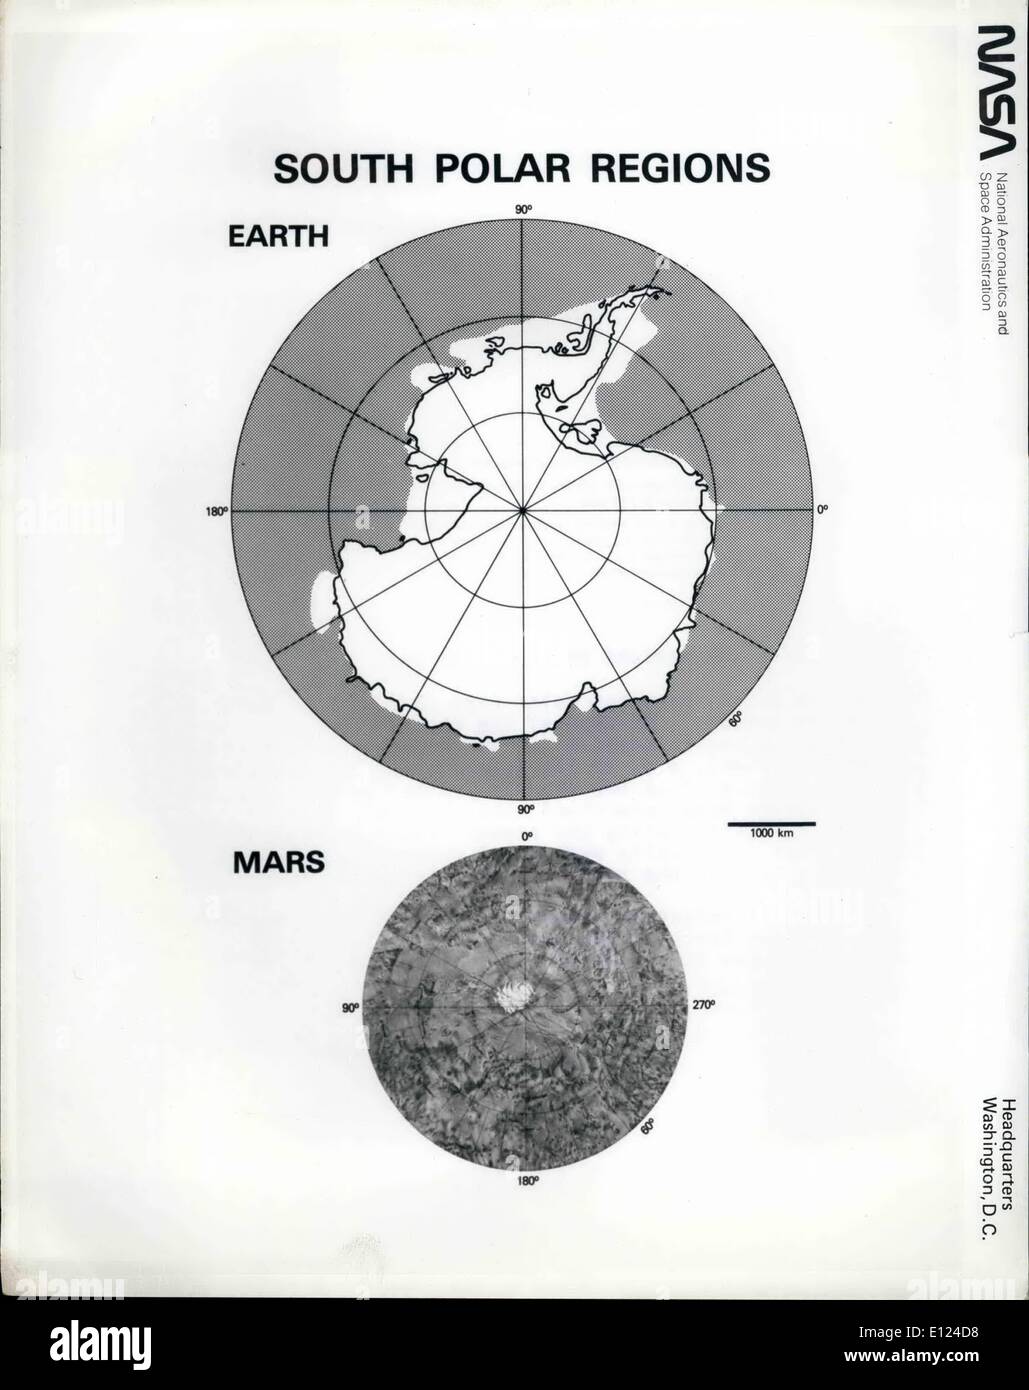 Oct. 10, 1984 - The South Polar Regions of Earth and Mars: Like the Earth, Mars has polar caps that wax and wane with seasons. Because of the much lower temperatures on Mars and the Composition of its atmosphere (primarily Carbon Dioxide), most of its polar ''snow'' is actually a thin coating of Carbon dioxide frost. However, spacecraft measurements have determined that the small residual ice cap that remains during the summer seasons in the northern hemisphere is actually made up of water ice. The same is probably true of the southern hemisphere ice cap Stock Photo